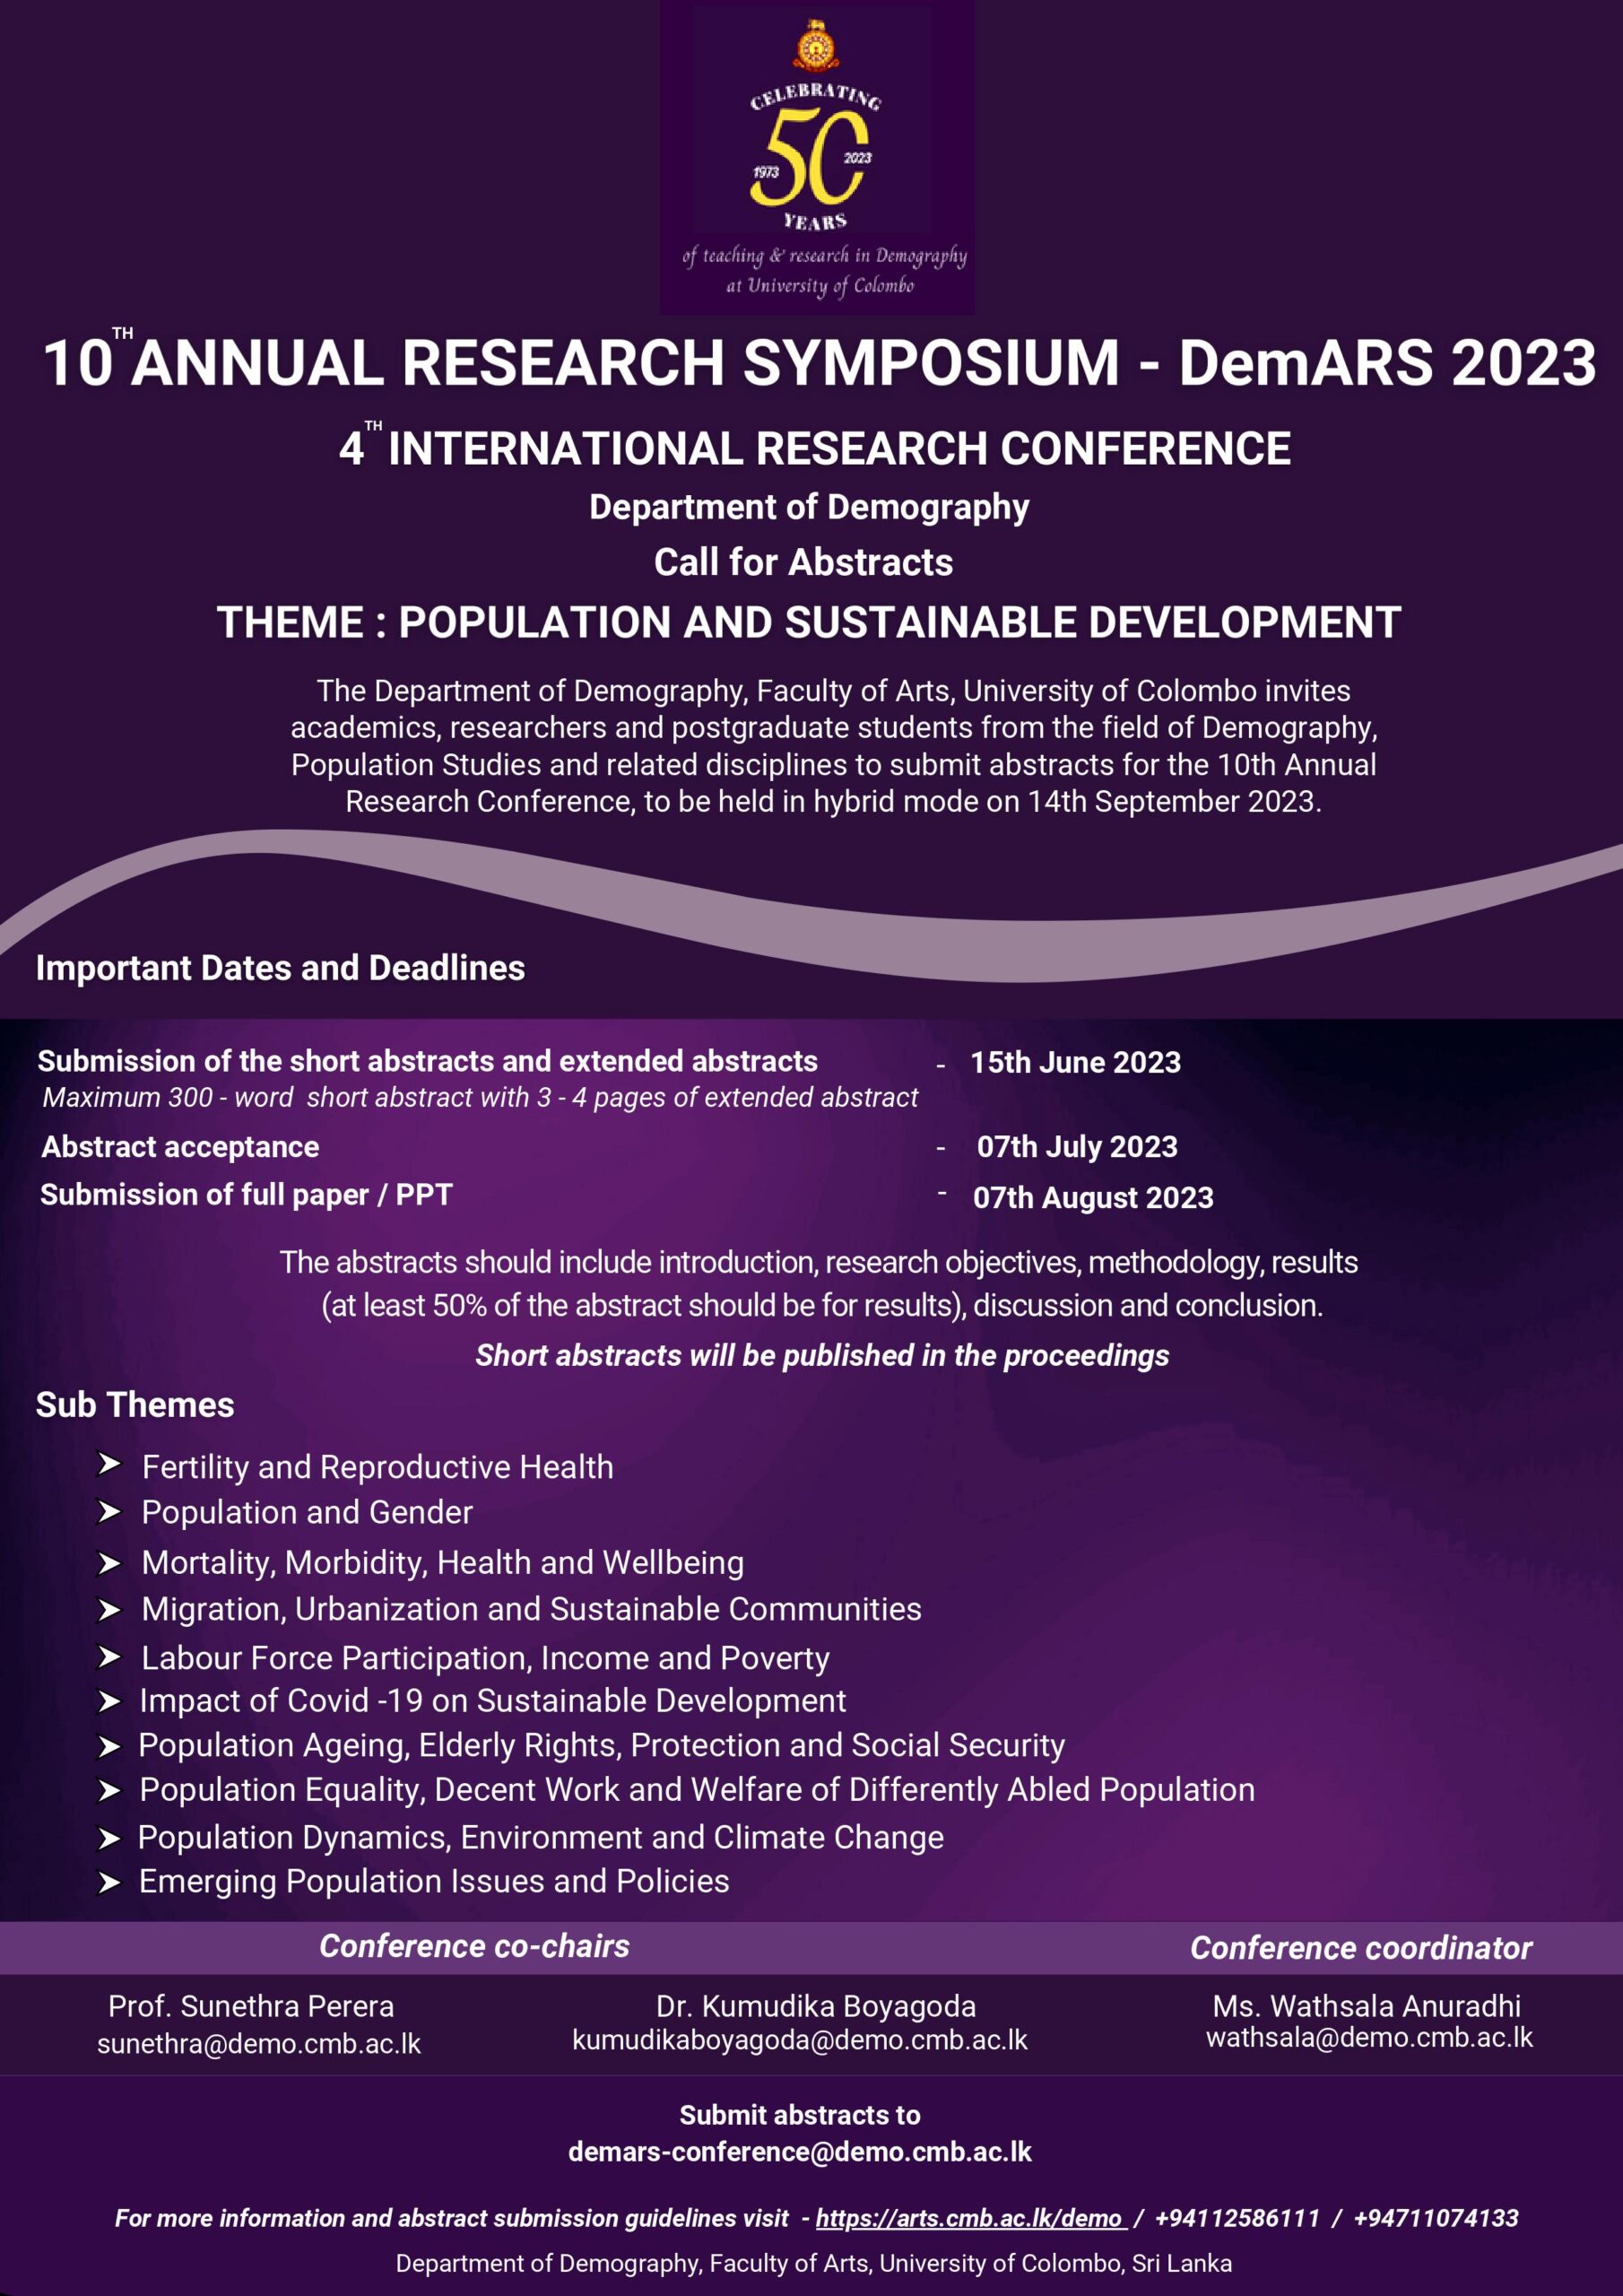 Annual Research Conference (International) – DemARS 2023